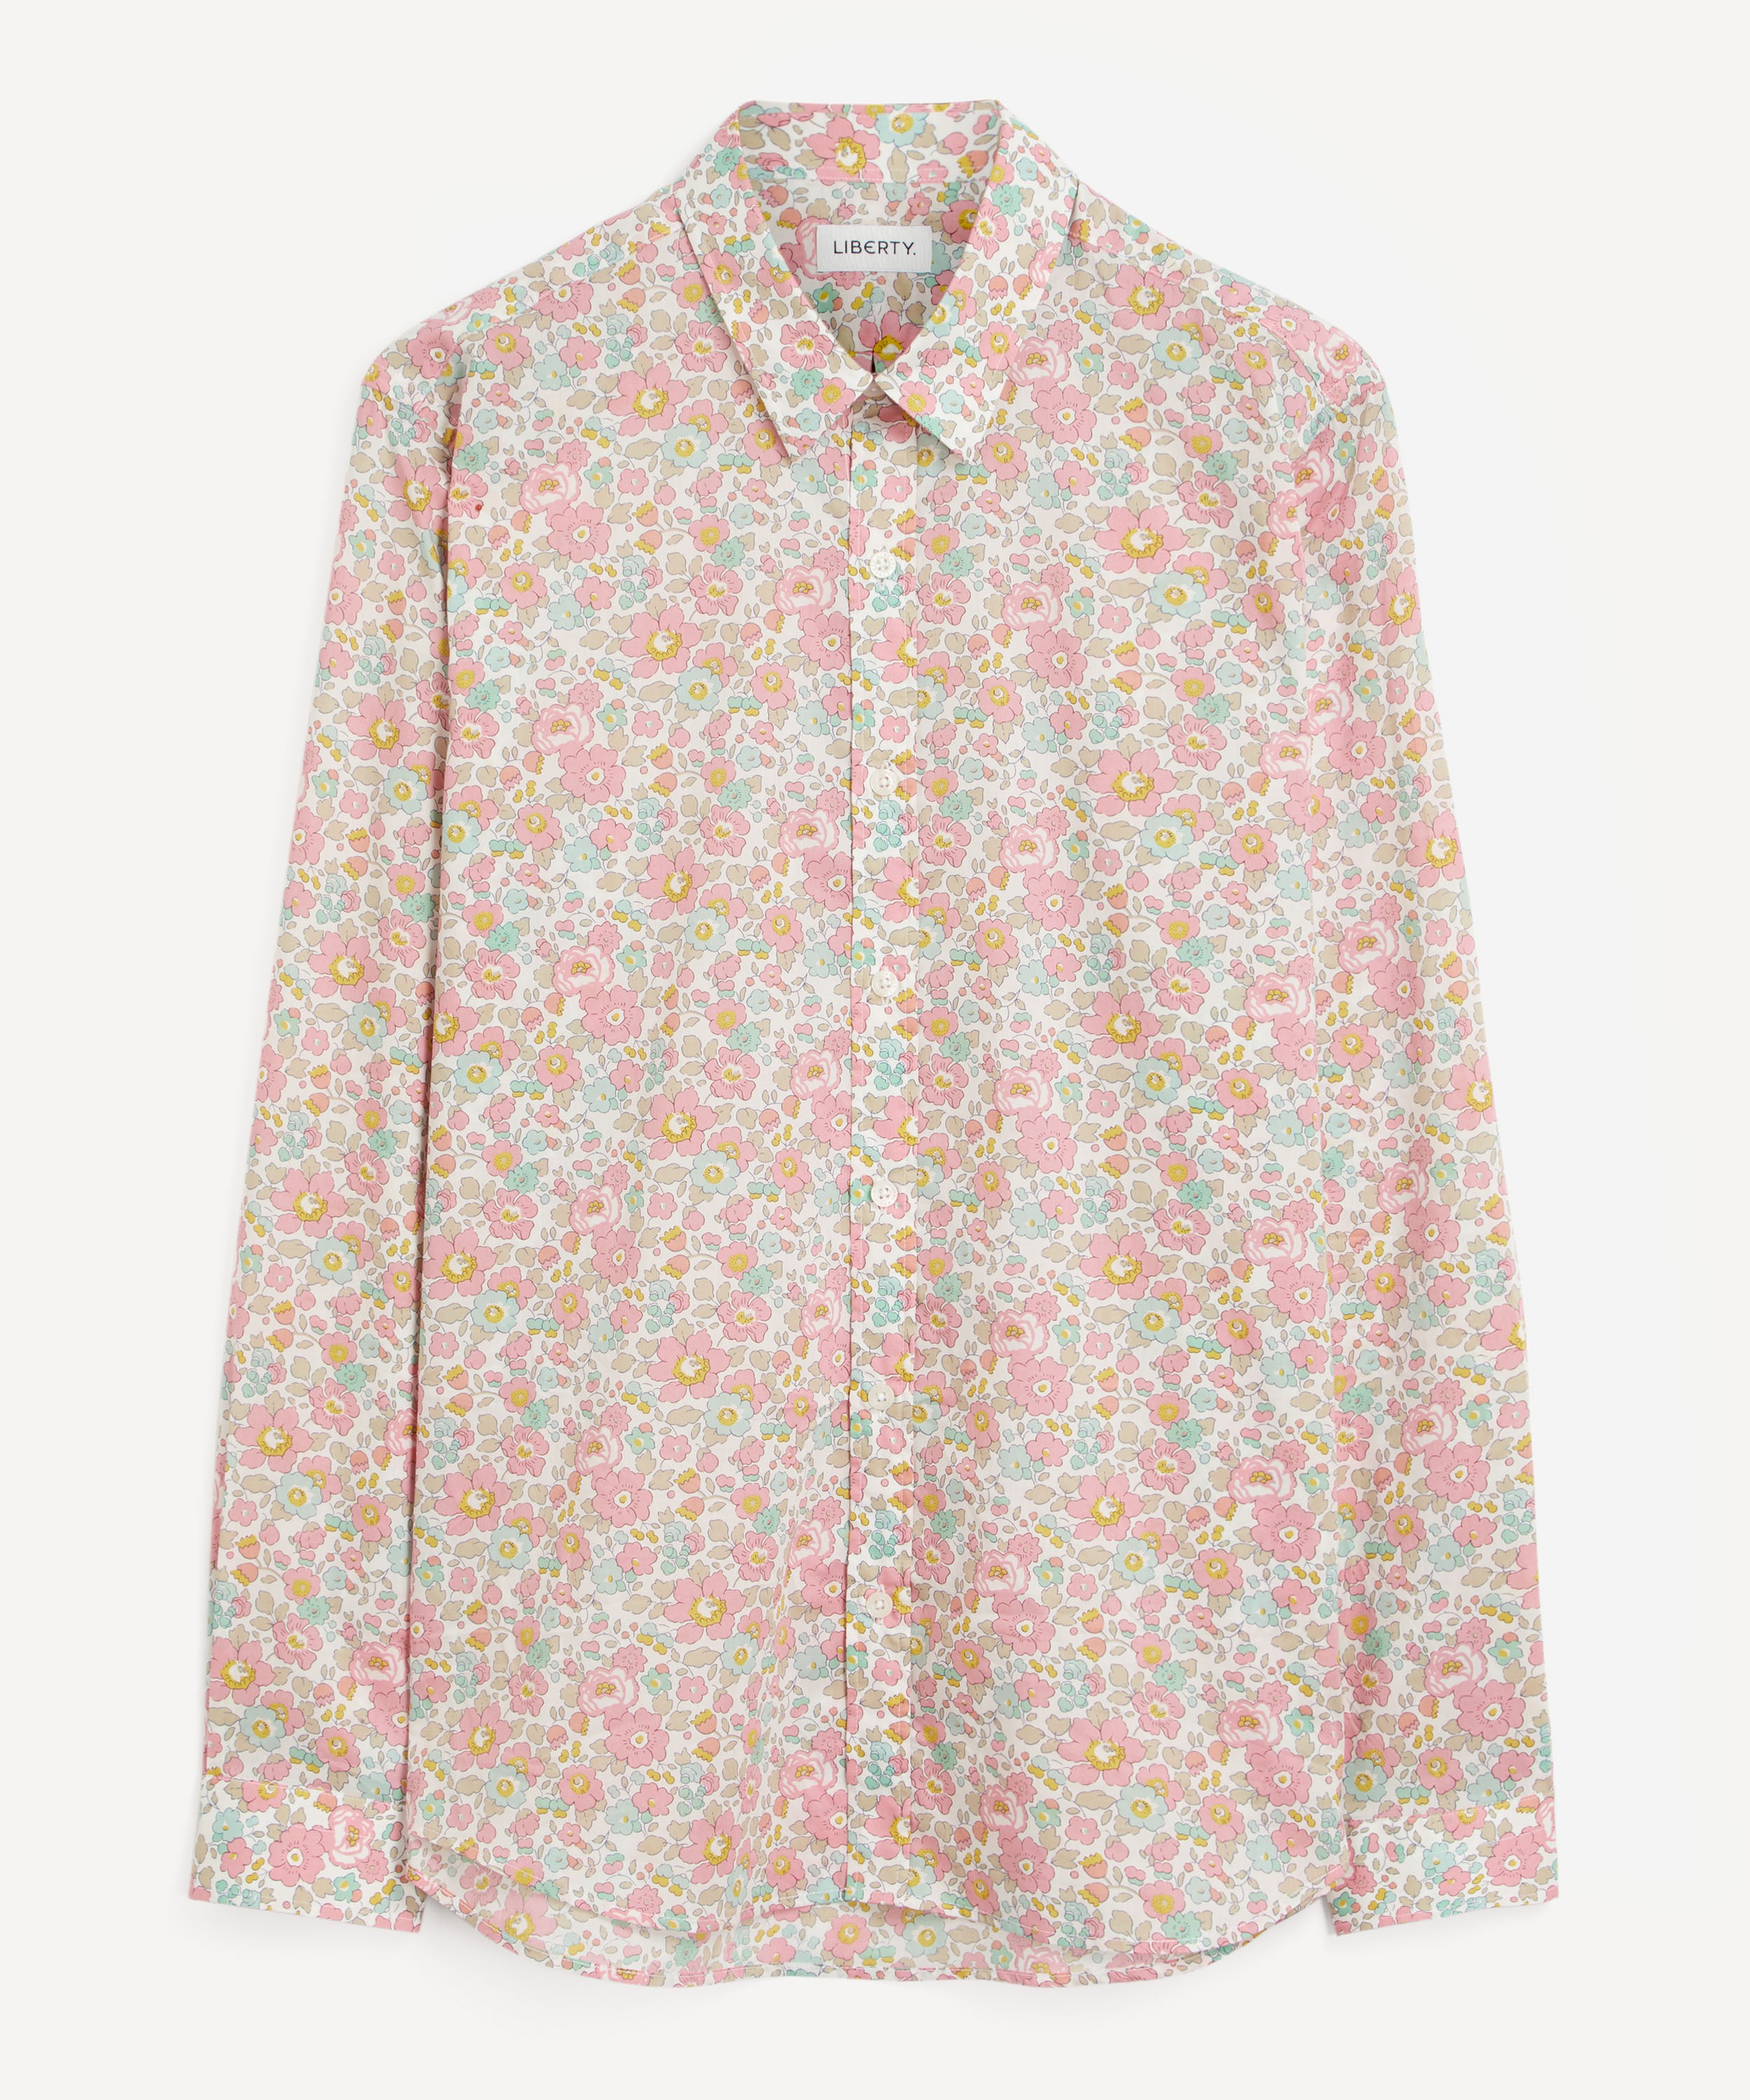 Liberty - Betsy Lasenby Tana Lawn™ Cotton Casual Classic Shirt image number null